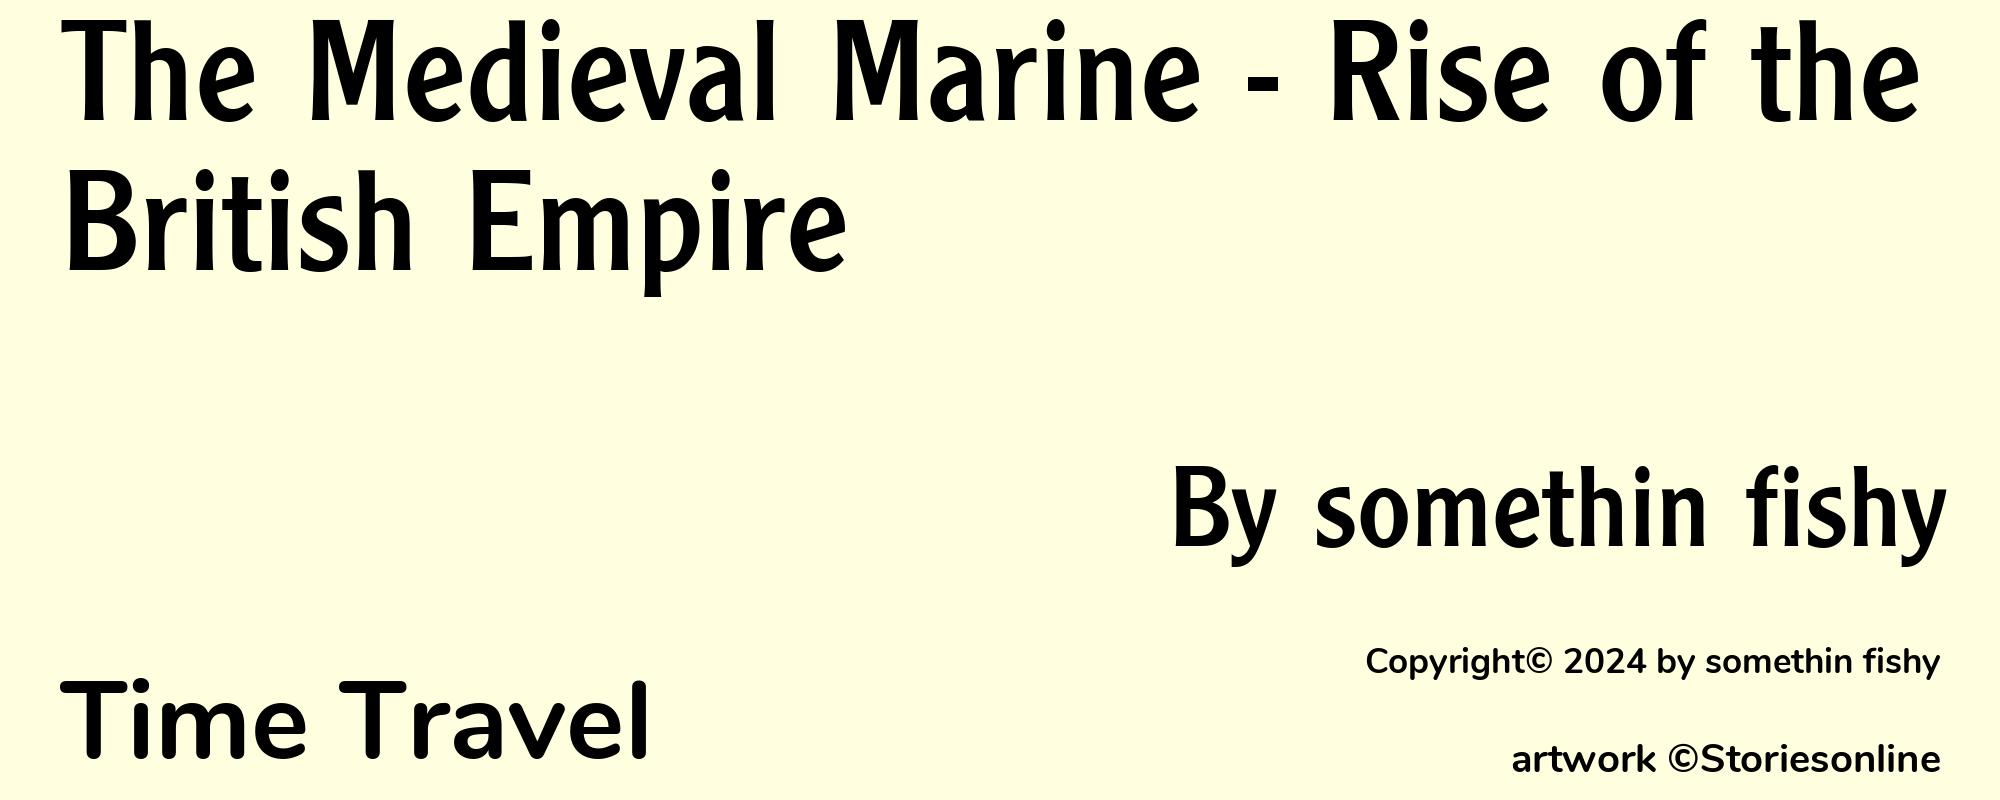 The Medieval Marine - Rise of the British Empire - Cover